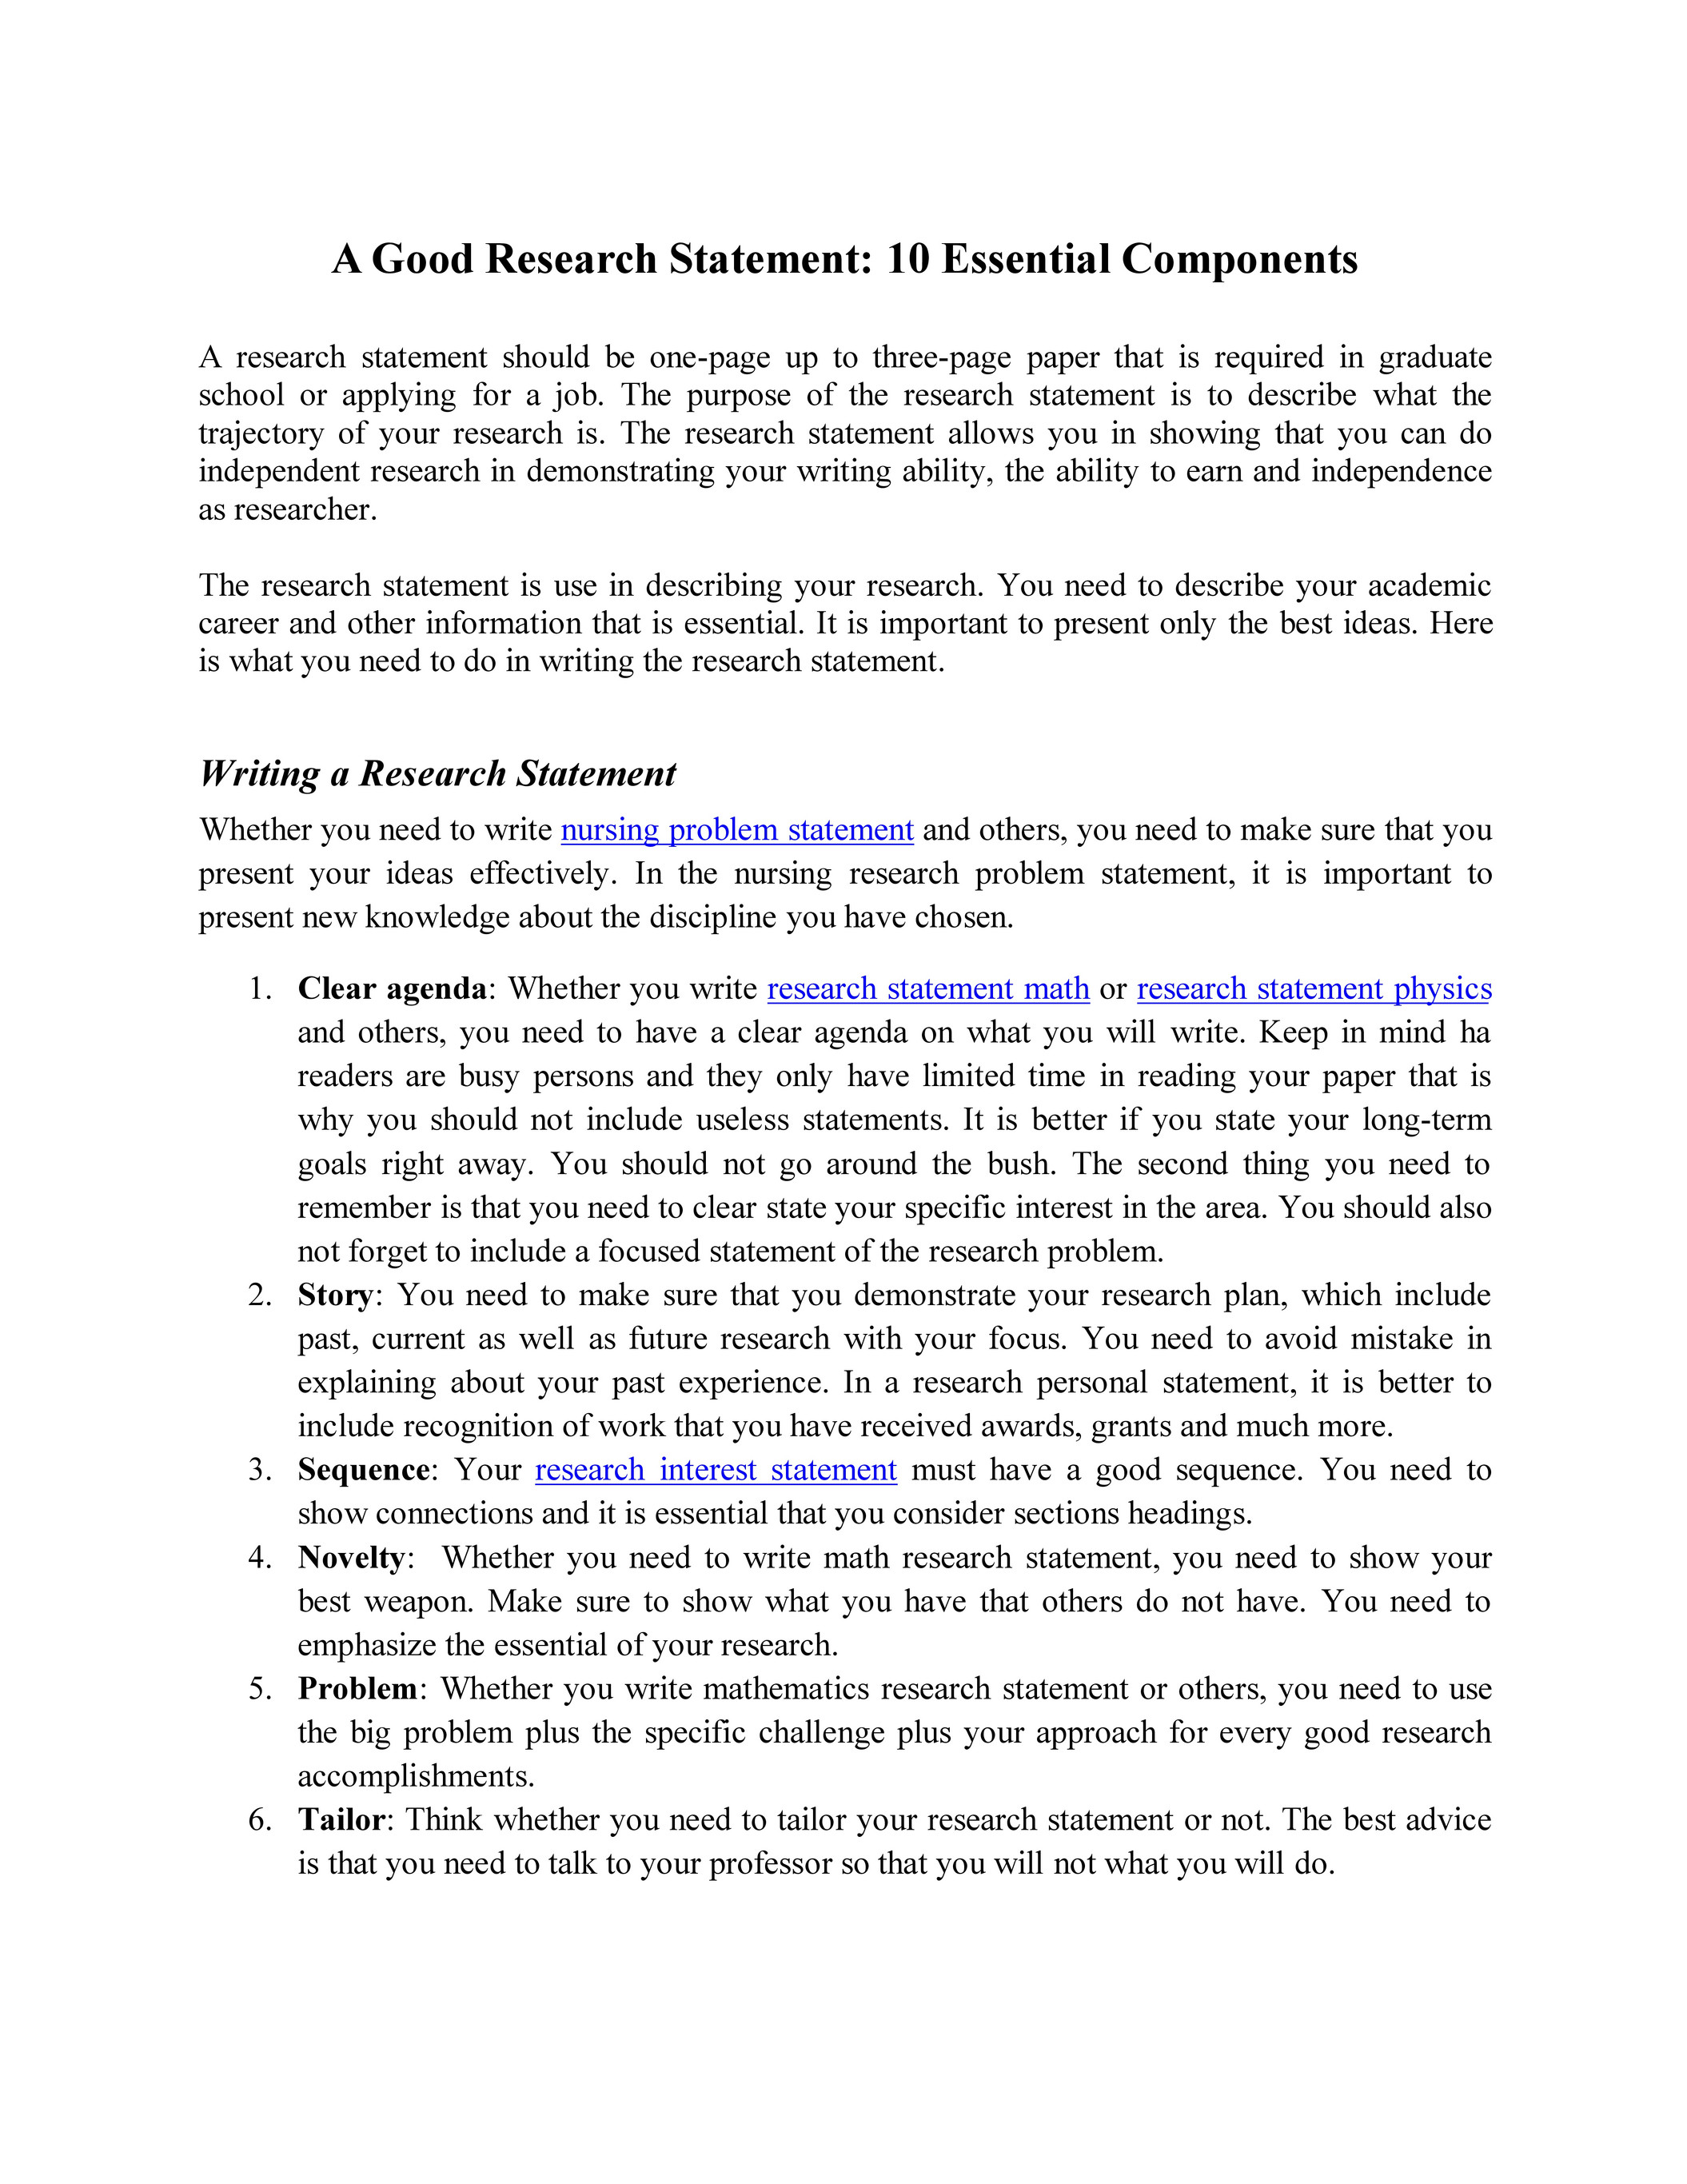 Research Statement - Research Statement- 7 Ingredients to Success